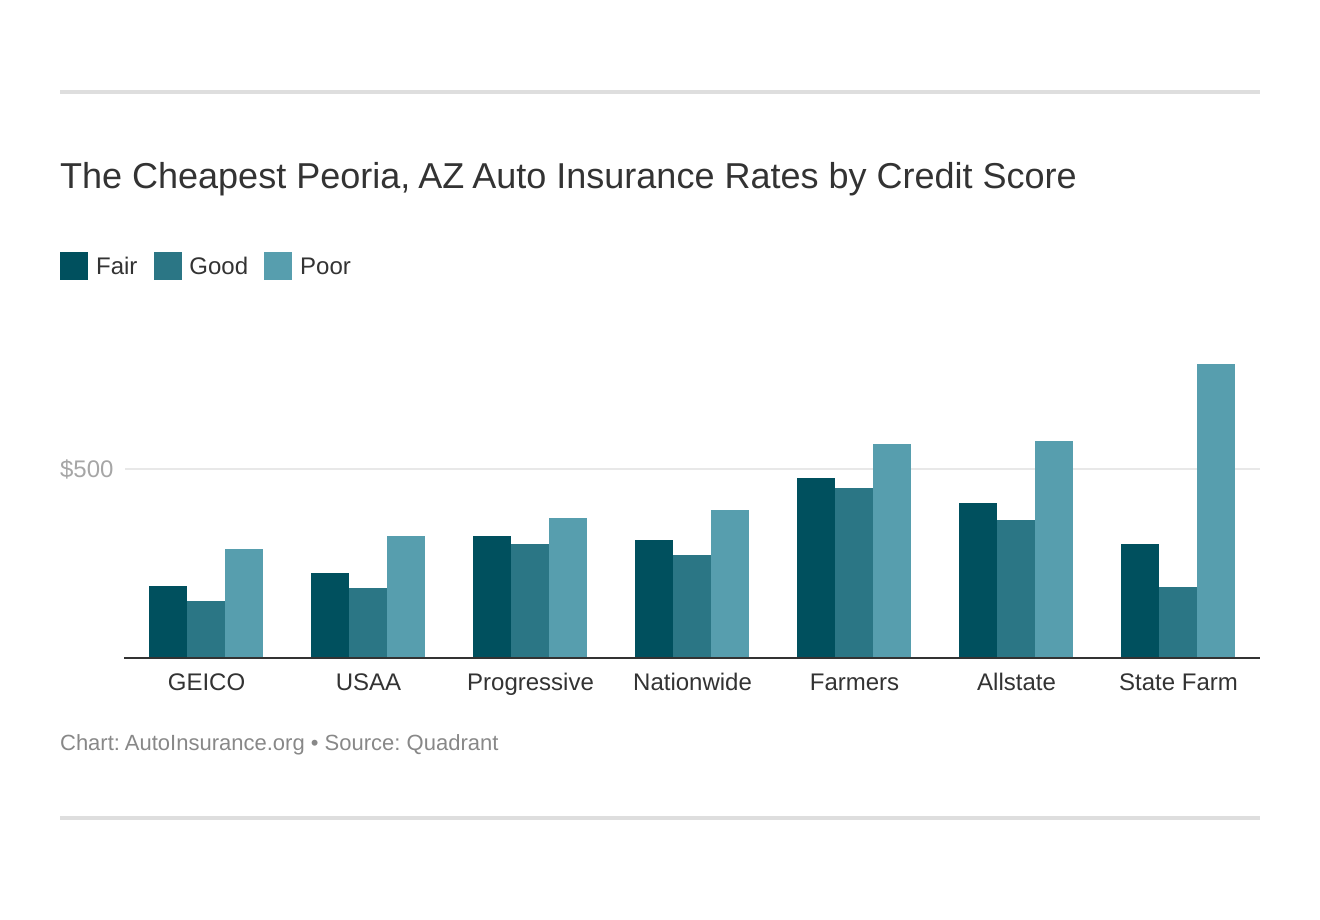 The Cheapest Peoria, AZ Auto Insurance Rates by Credit Score